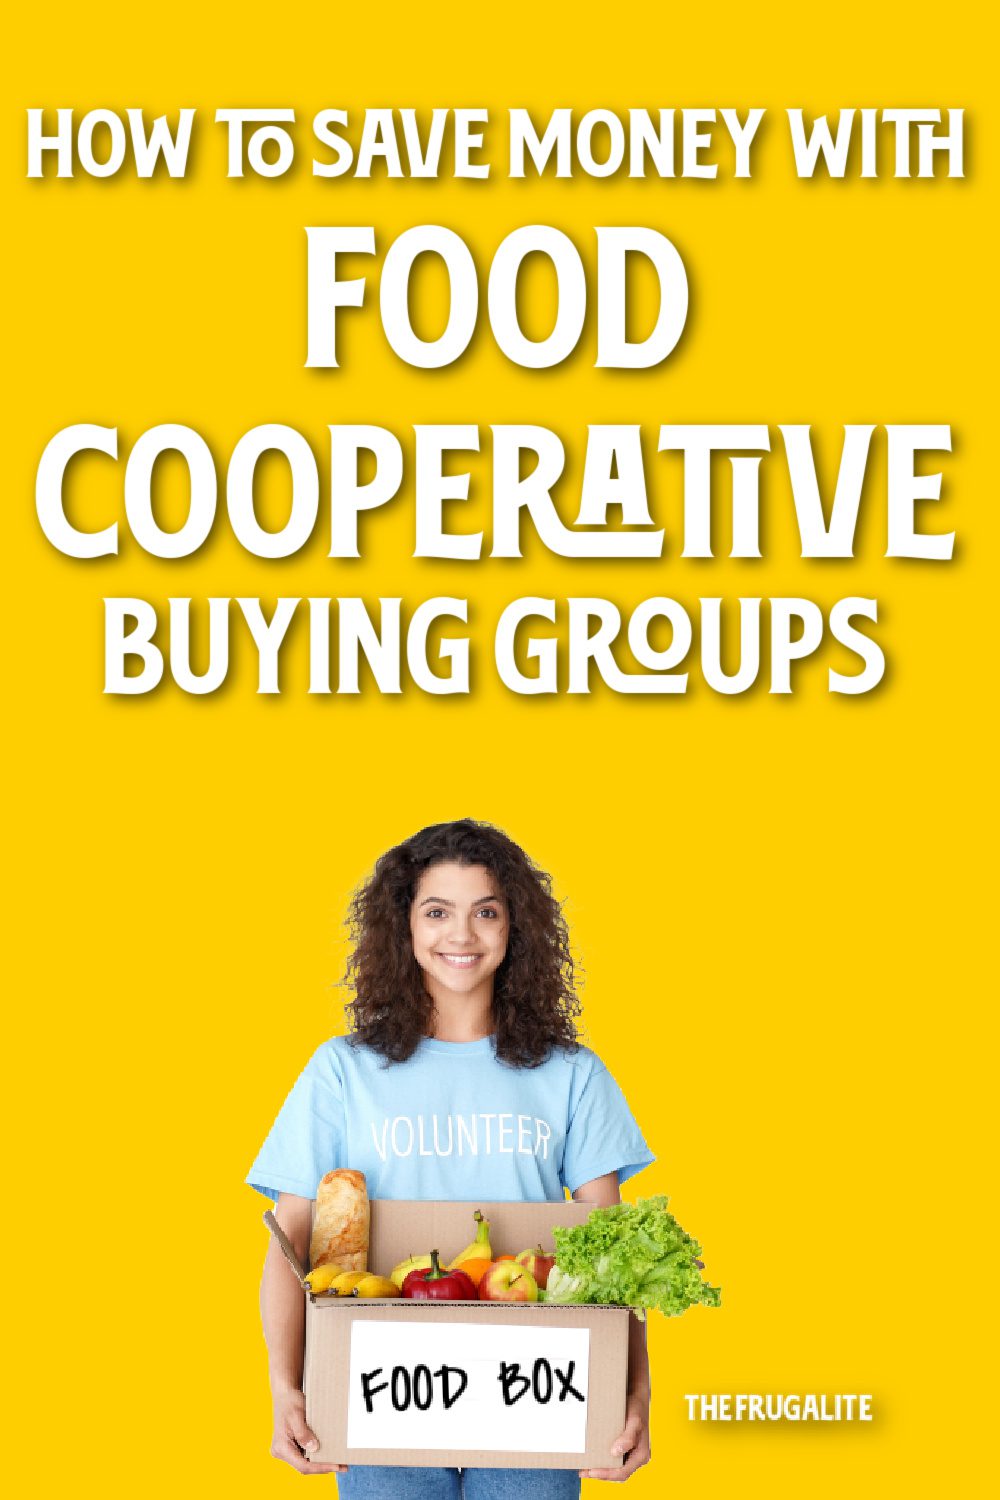 How to Save Money with Food Cooperative Buying Groups